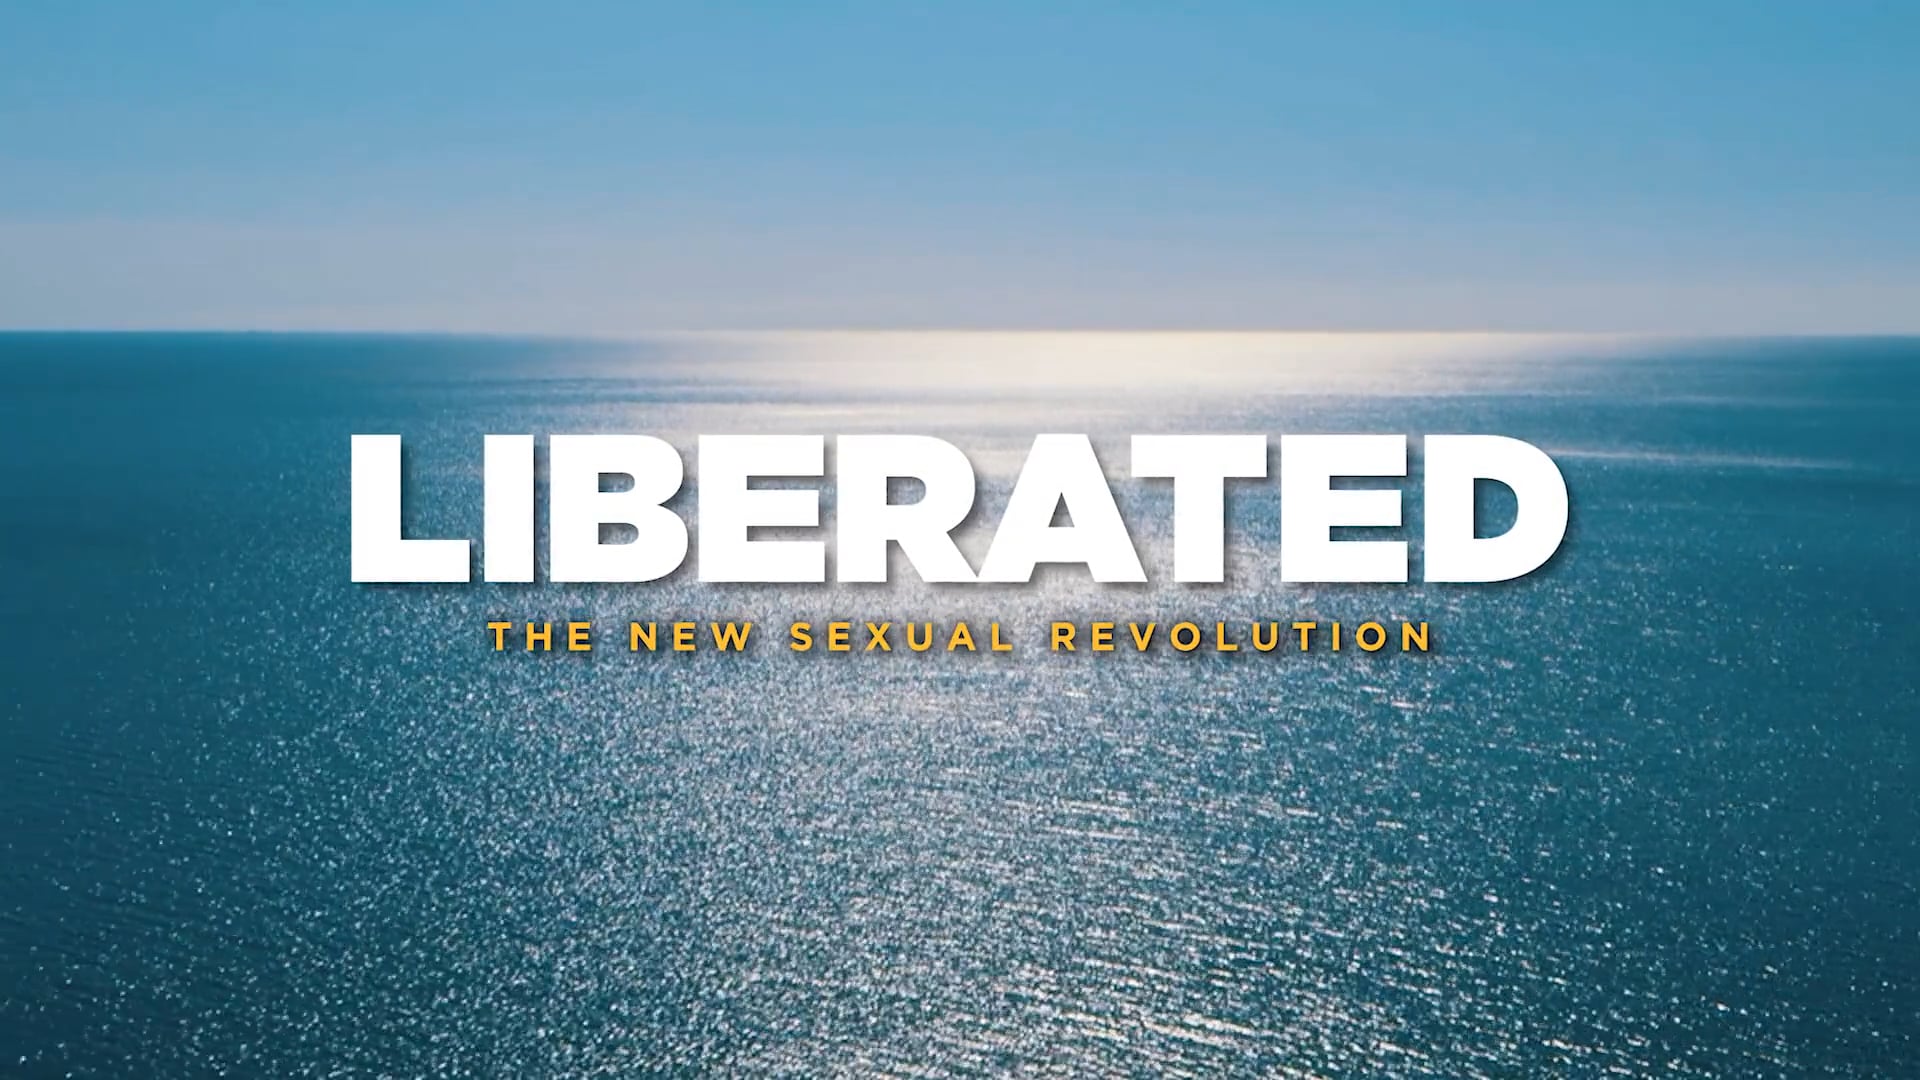 LIBERATED: THE NEW SEXUAL REVOLUTION | Official Trailer (2018)